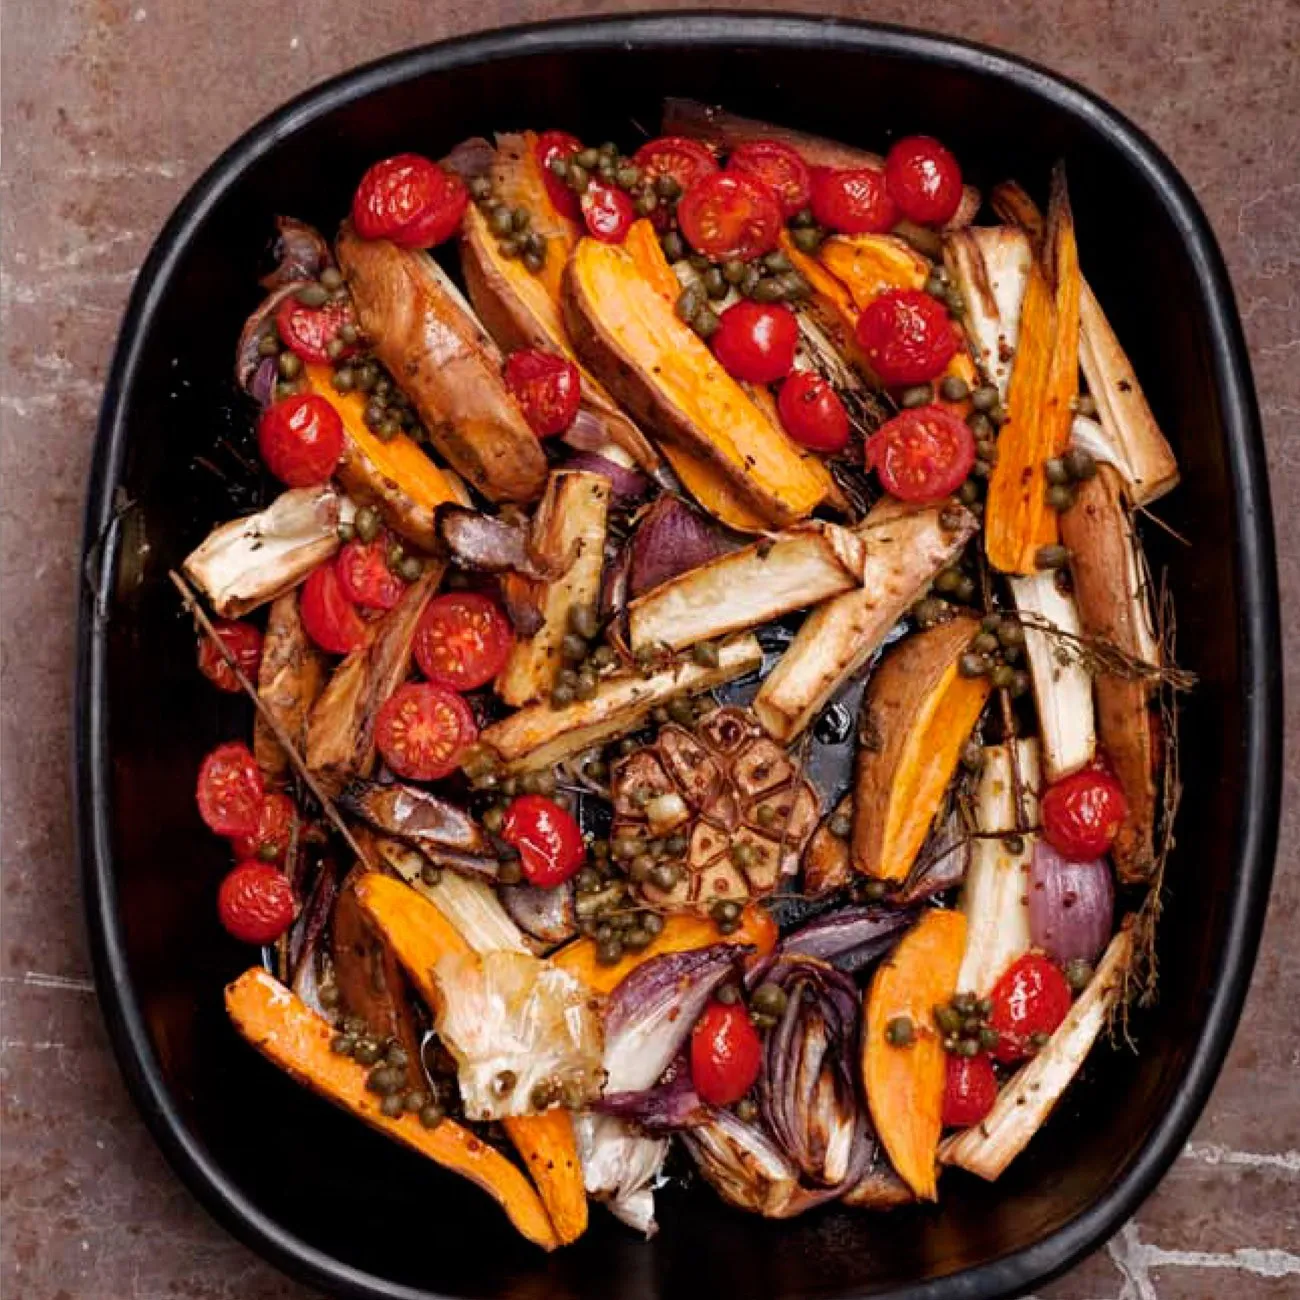 Ottolenghi’s roasted parsnips and sweet potatoes with caper vinaigrette